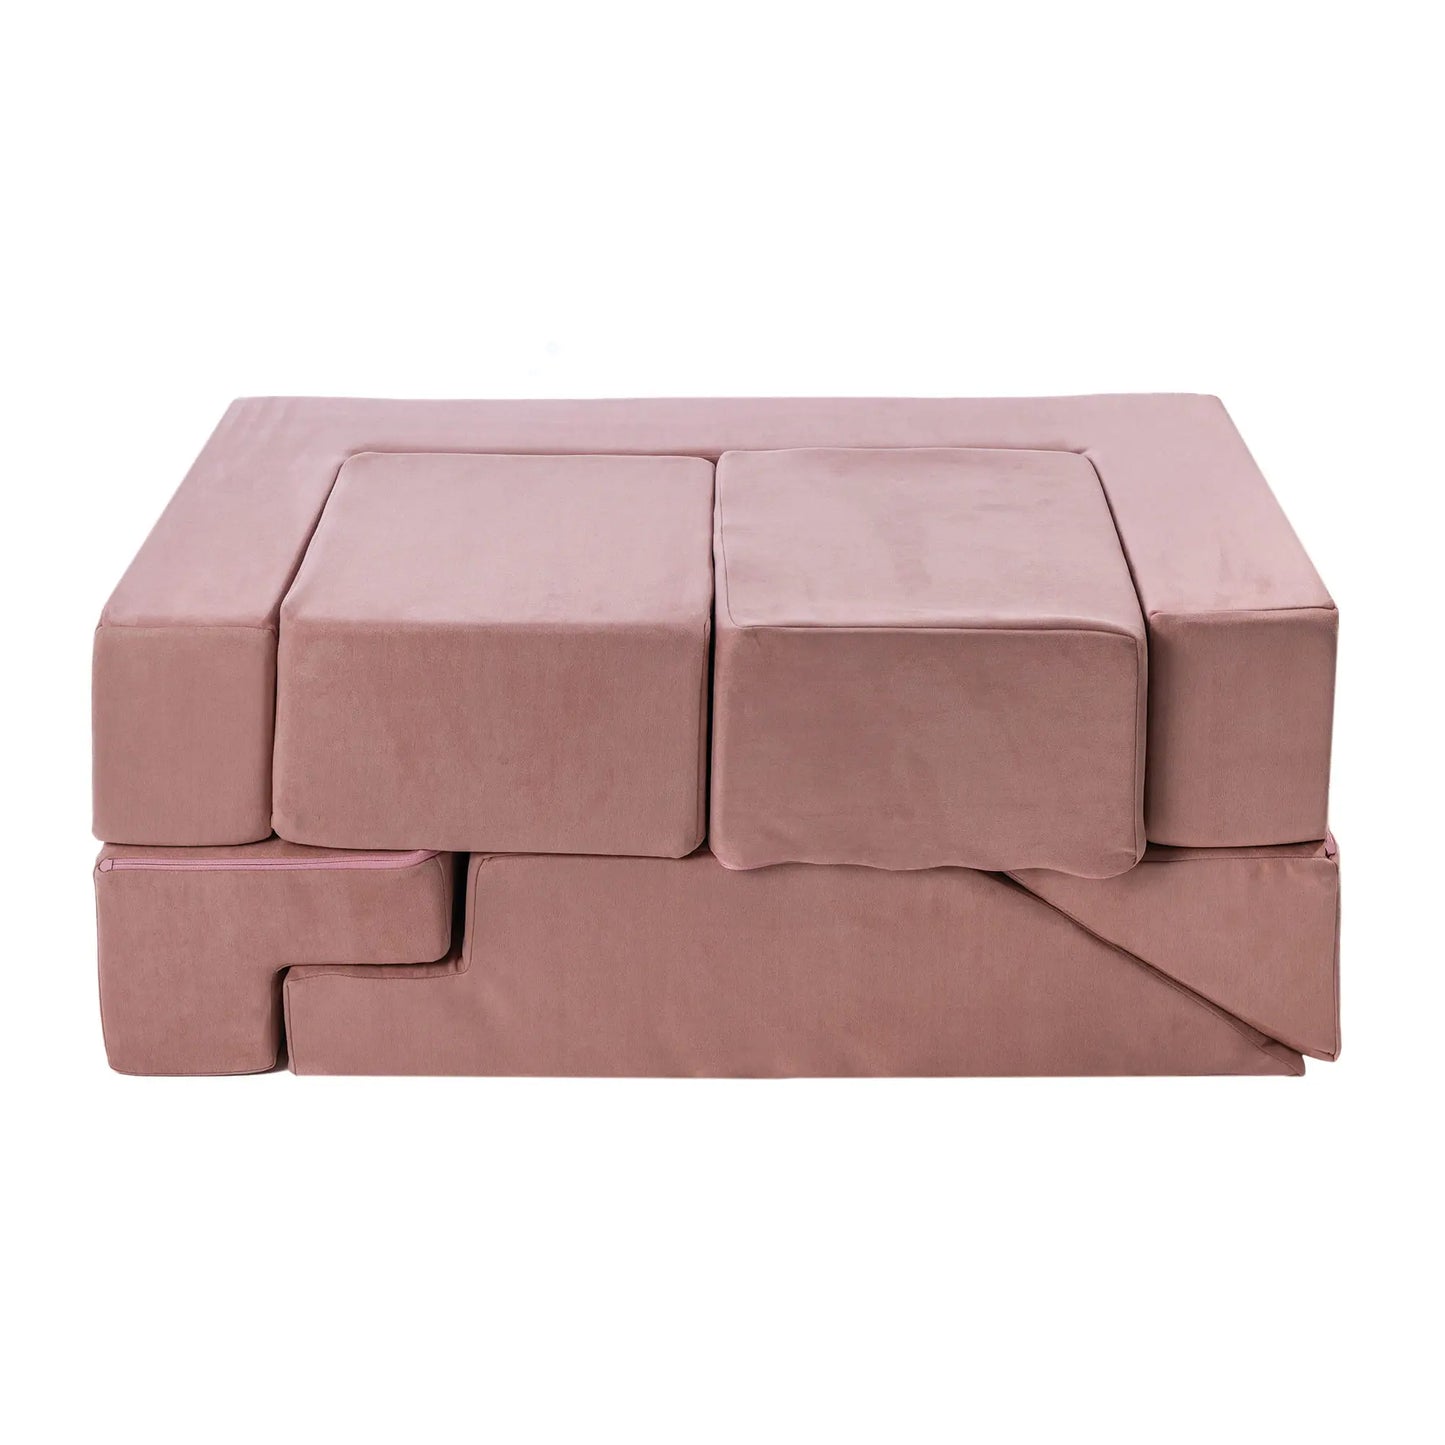 A multifunctional playground for children, the Velvet Bricks Set offers soft, stable shapes for safe, creative play. Ideal for active kids and educational spaces.